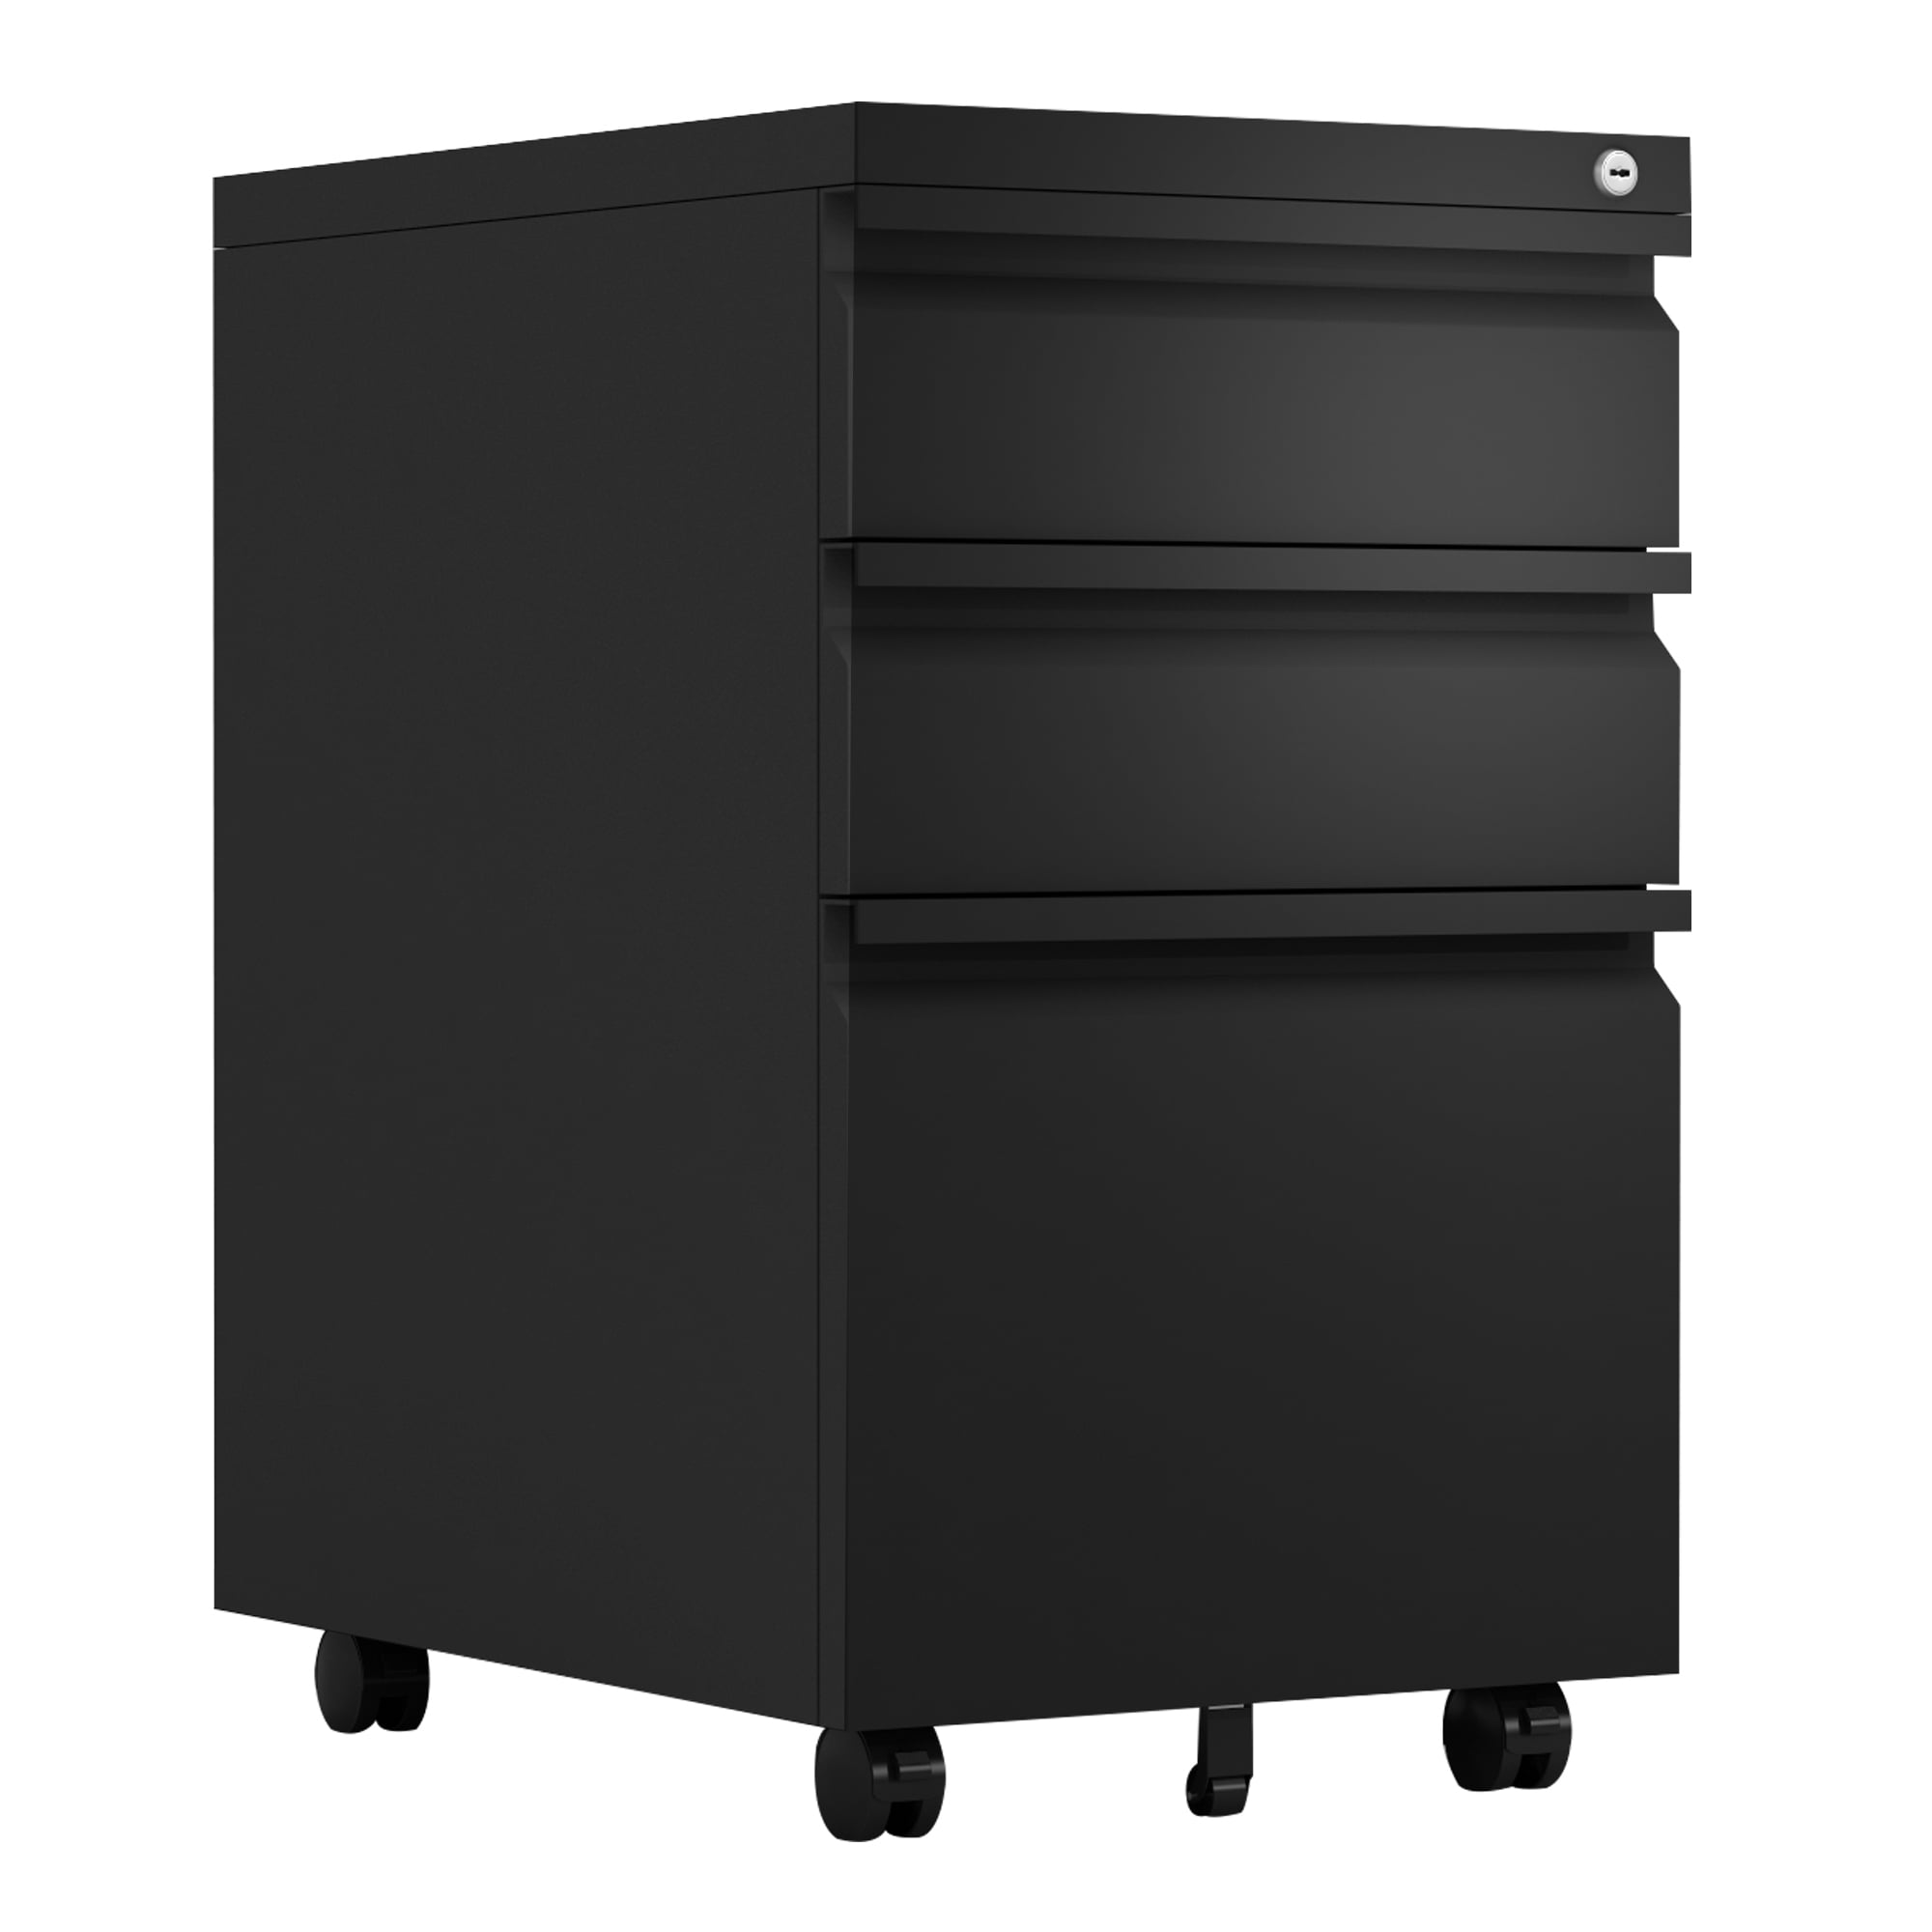 3 Drawer Portable Vertical Mobile File Cabinet Fully Assembled Except Casters Home Office Wooden Storage for A4 or Letter/Legal Size Black 